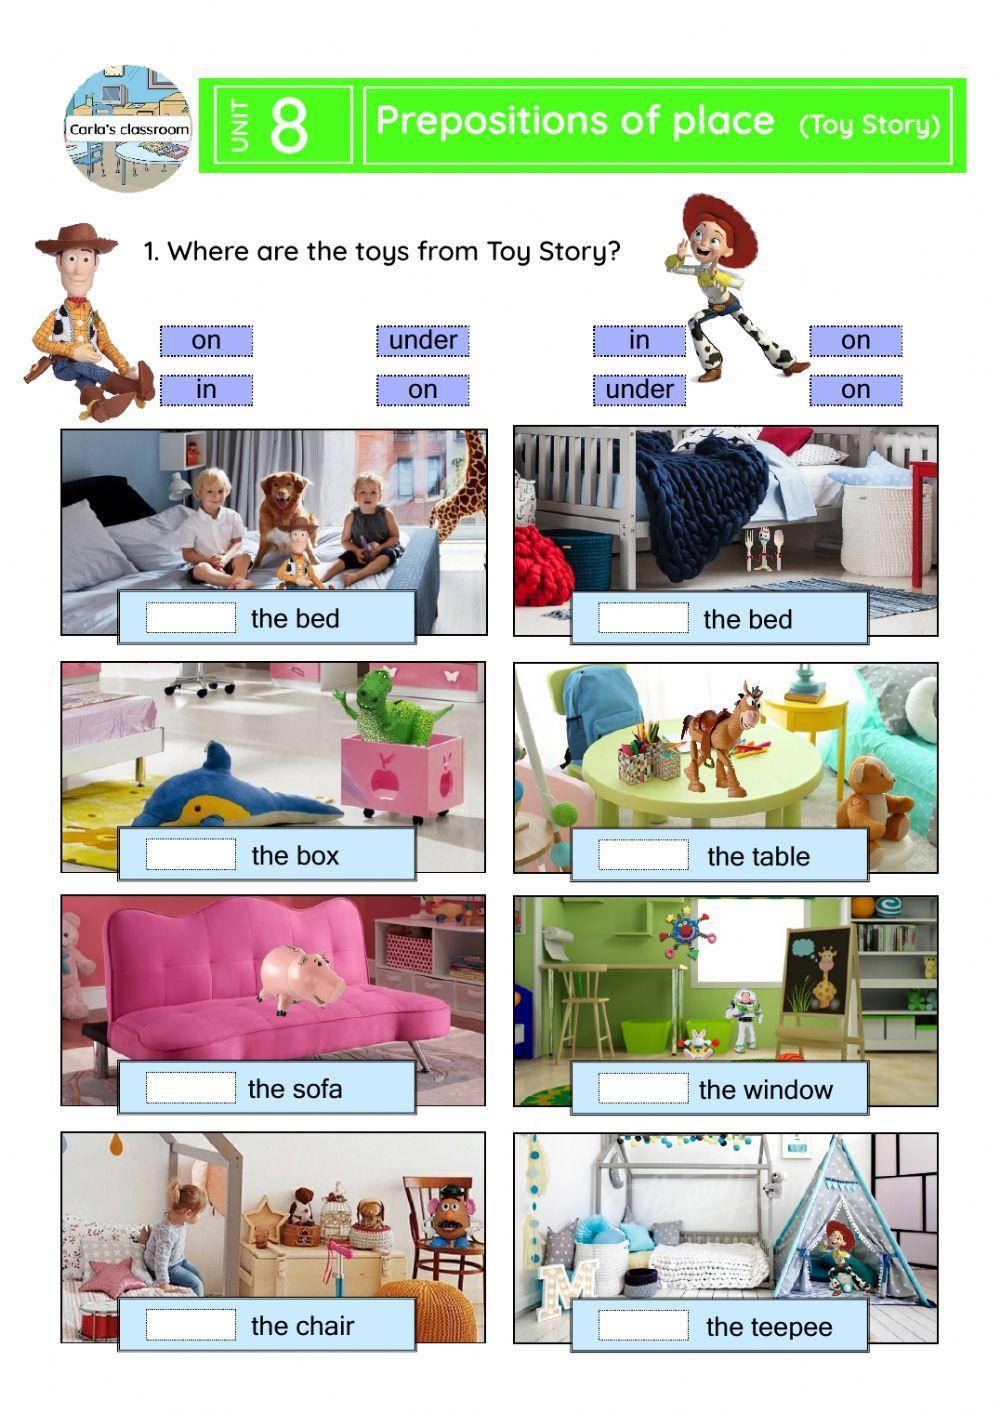 Prepositions of place (Toy Story)